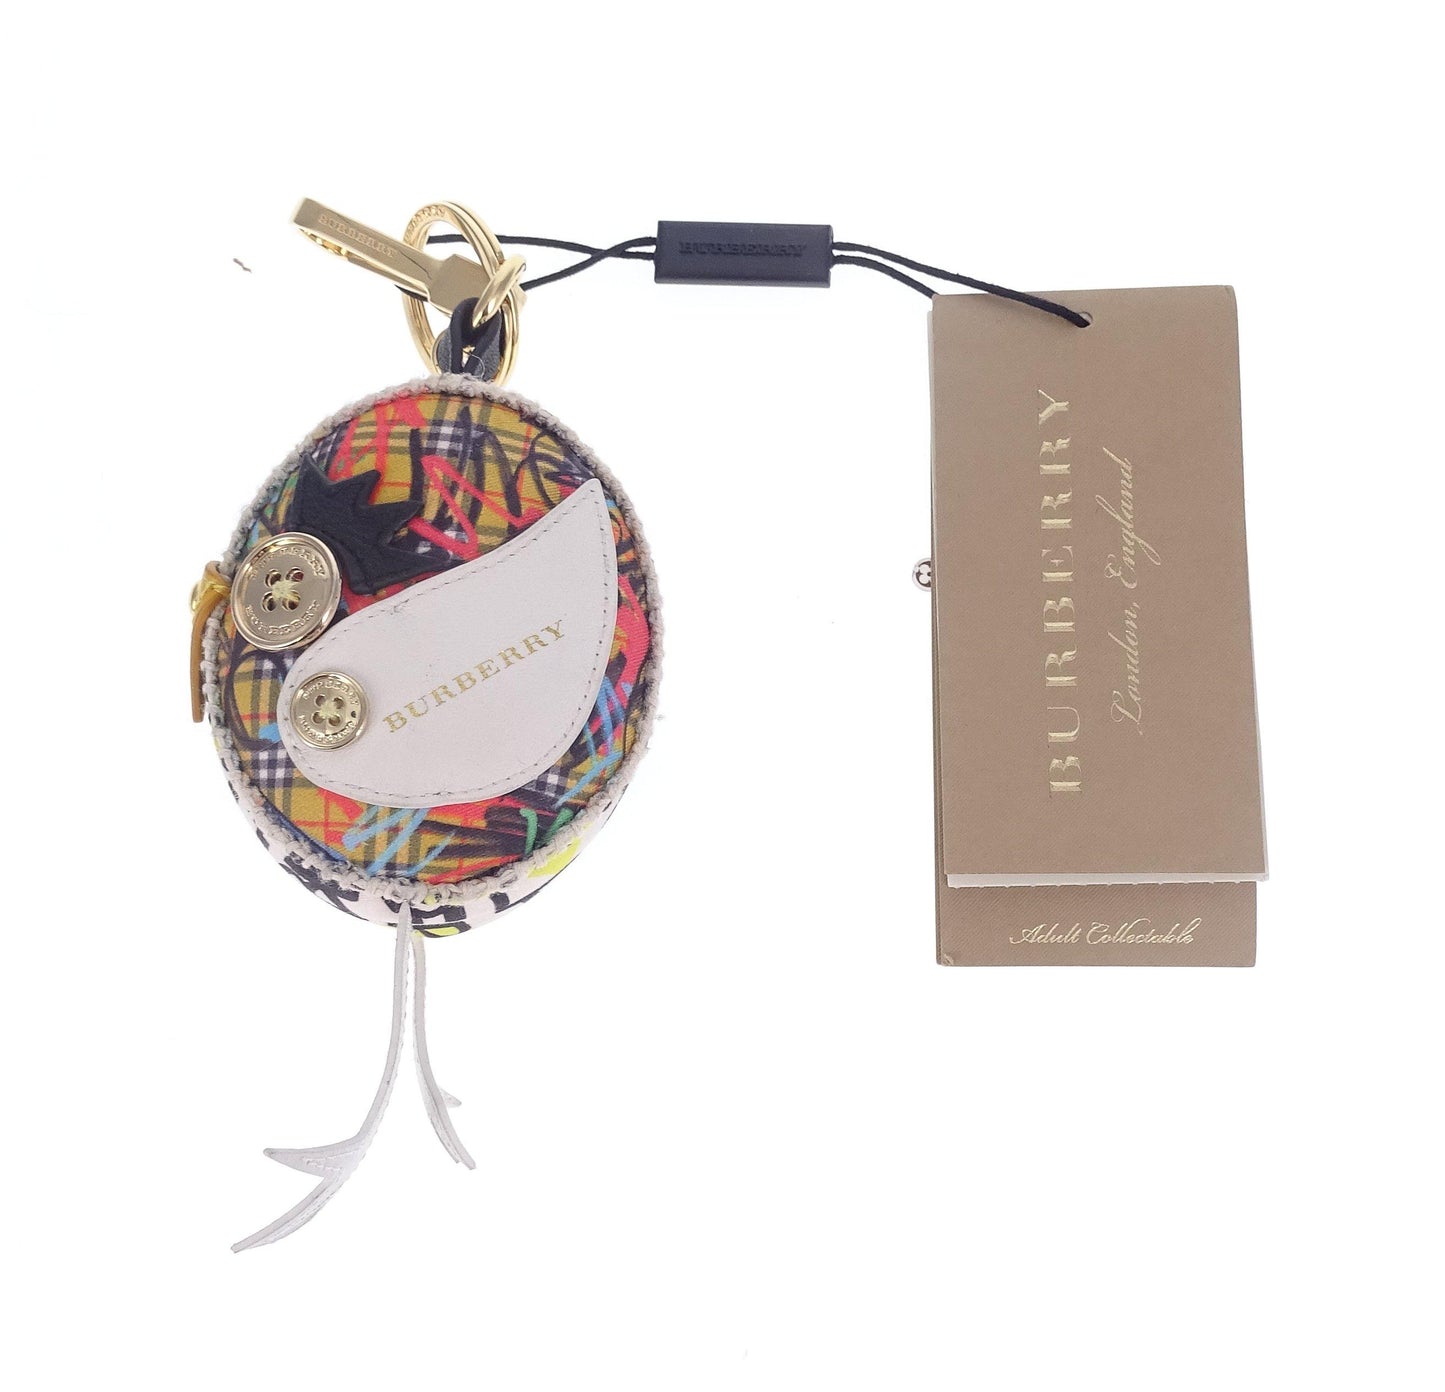 Burberry Creature Charm Bird Limited Collection Bags Burberry 